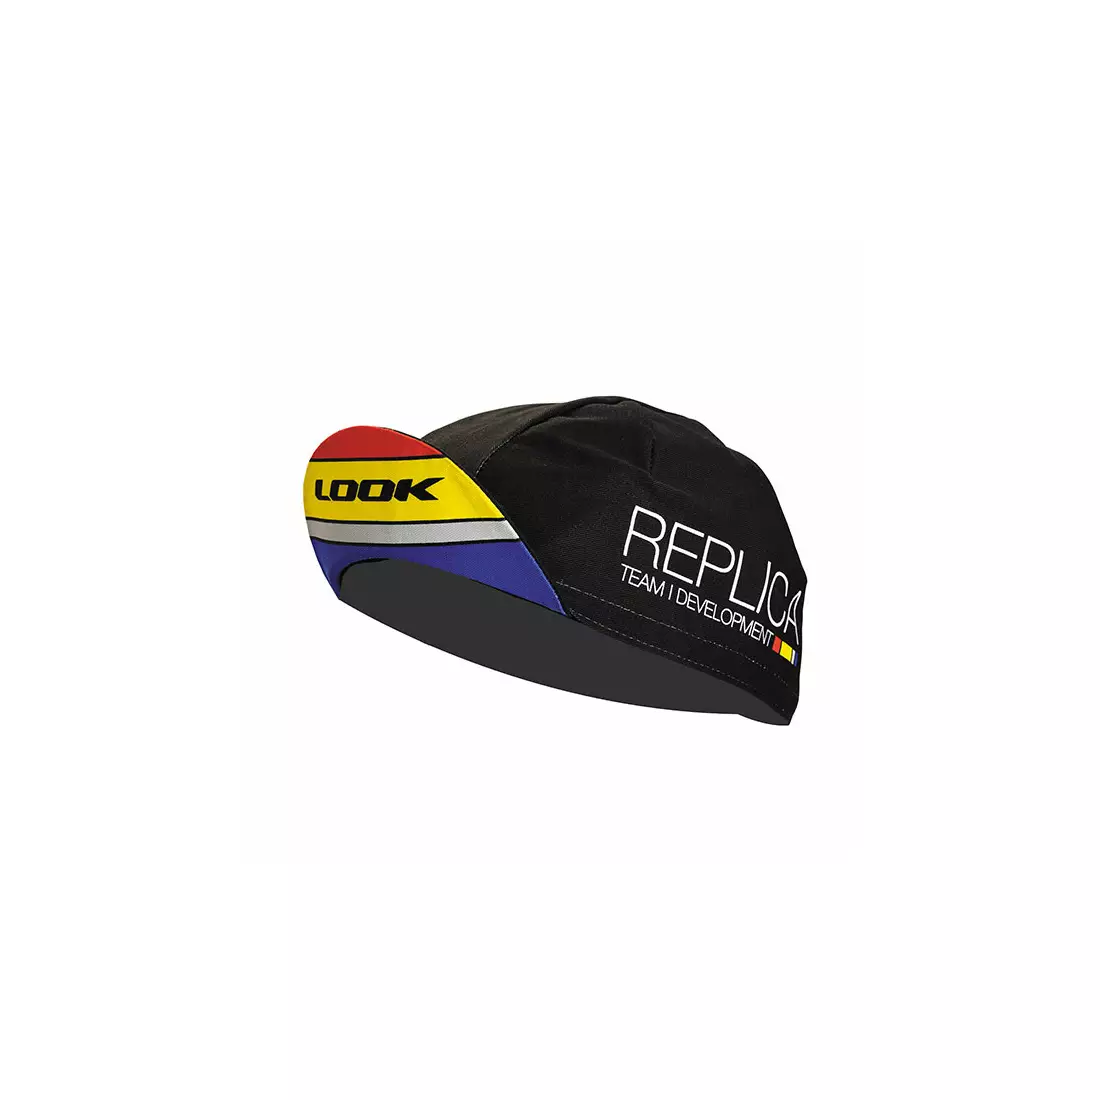 LOOK SS17 REPLICA Cycling cap 00012487 one size